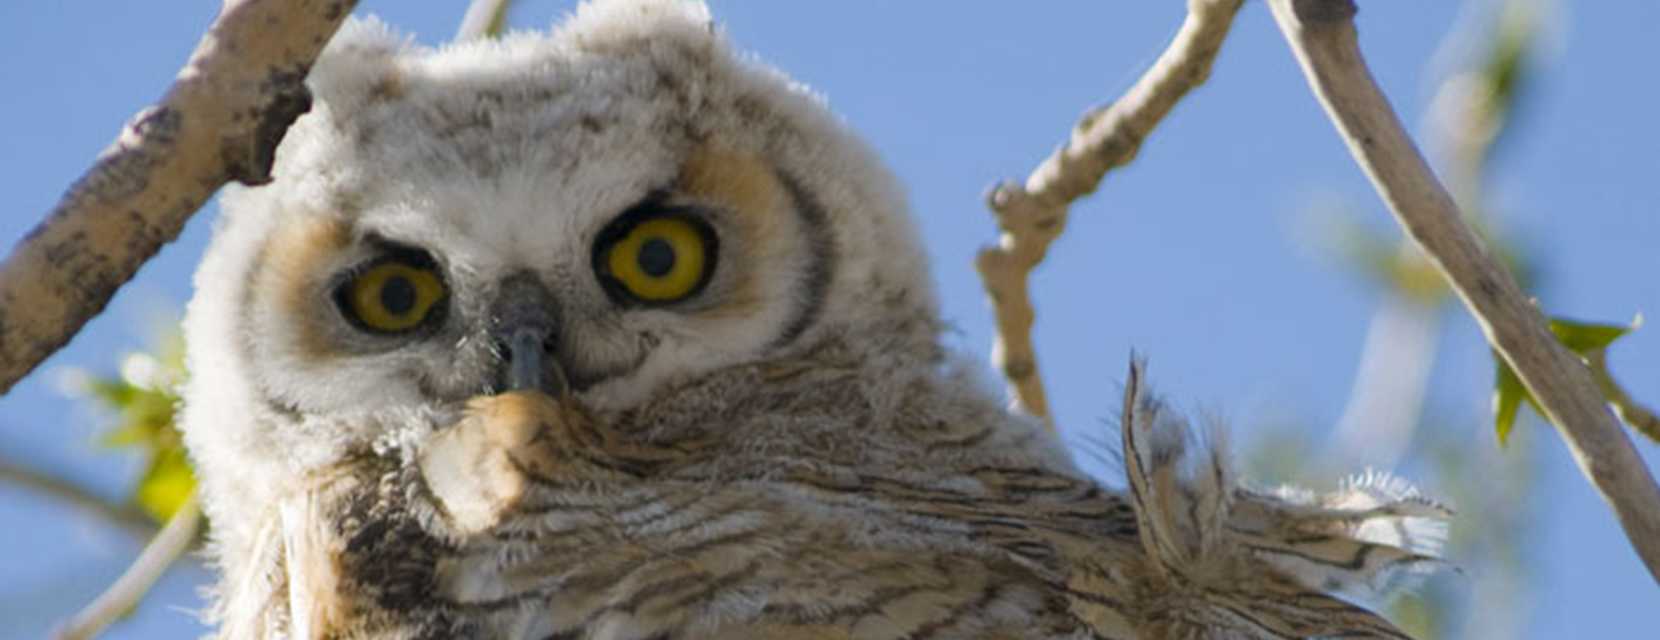 An owl at Rocky Mountain Arsenal National Wildlife Refuge